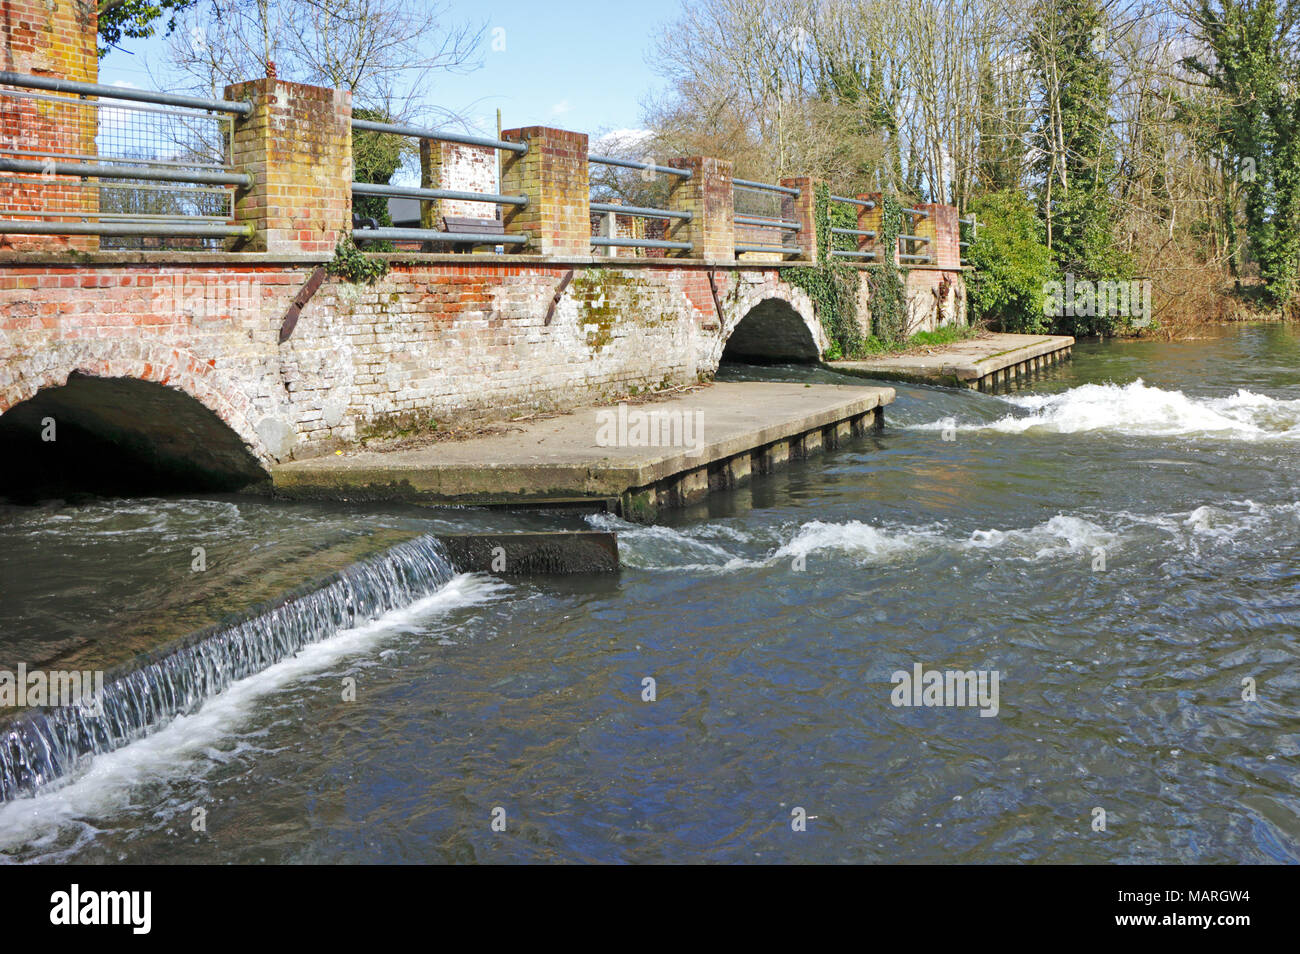 A view of the River Bure exiting the remains of the former watermill at Horstead, Norfolk, England, United Kingdom, Europe. Stock Photo